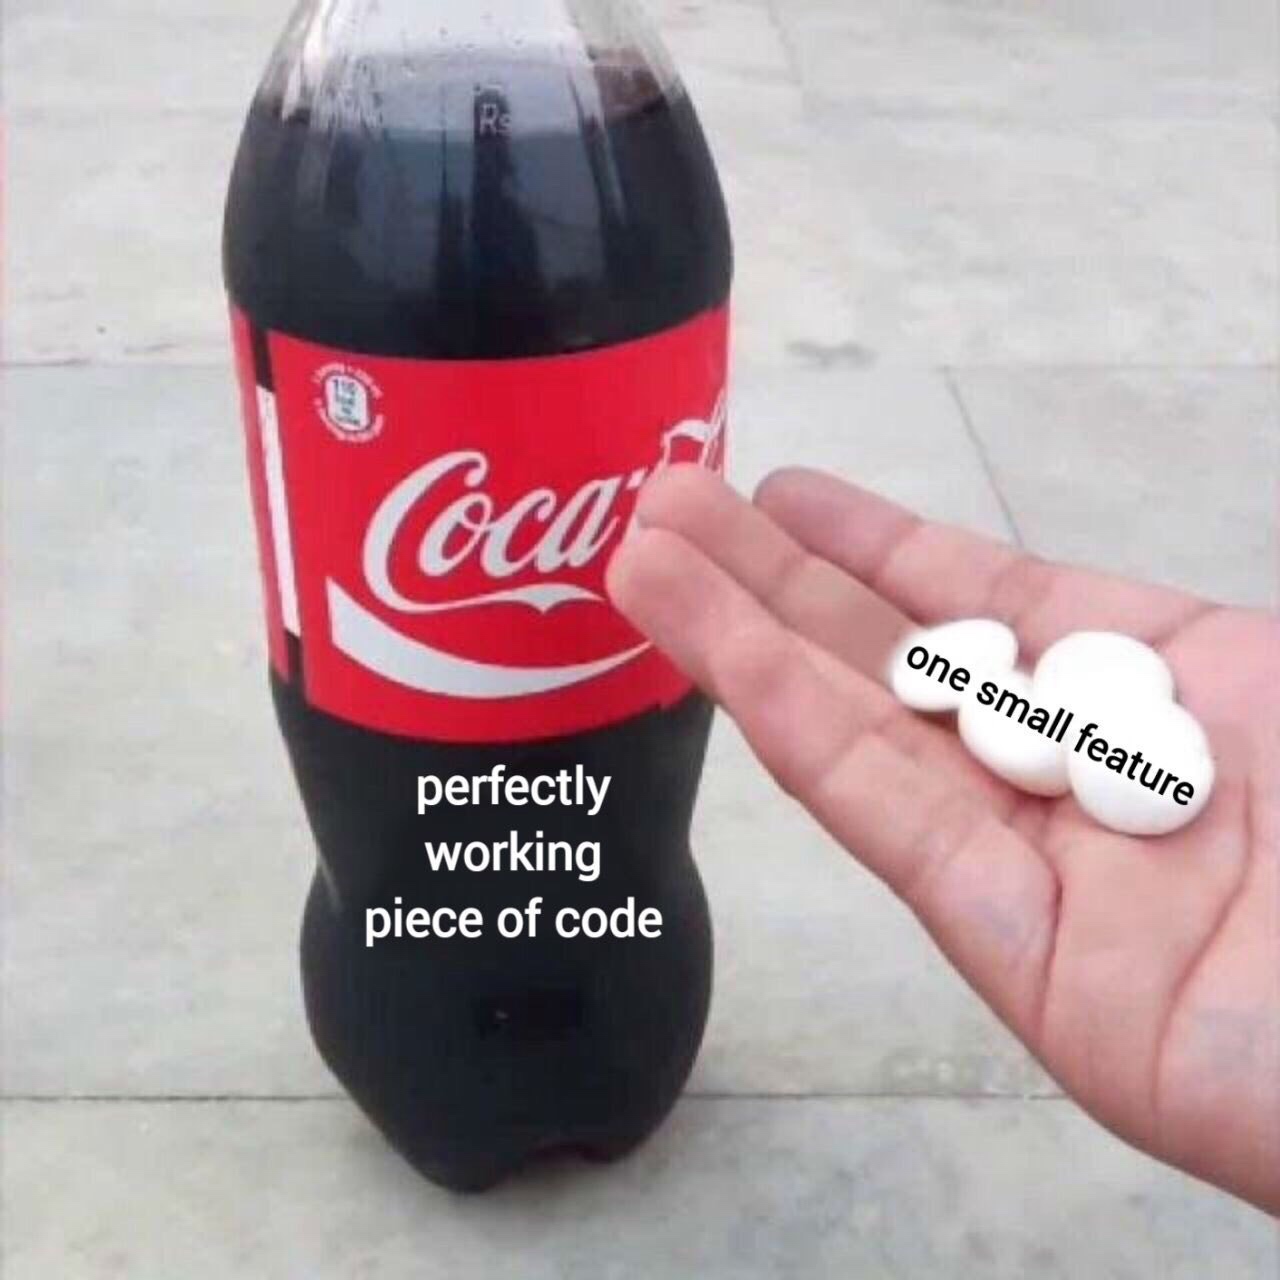 meme format - Coca one small feature perfectly working piece of code